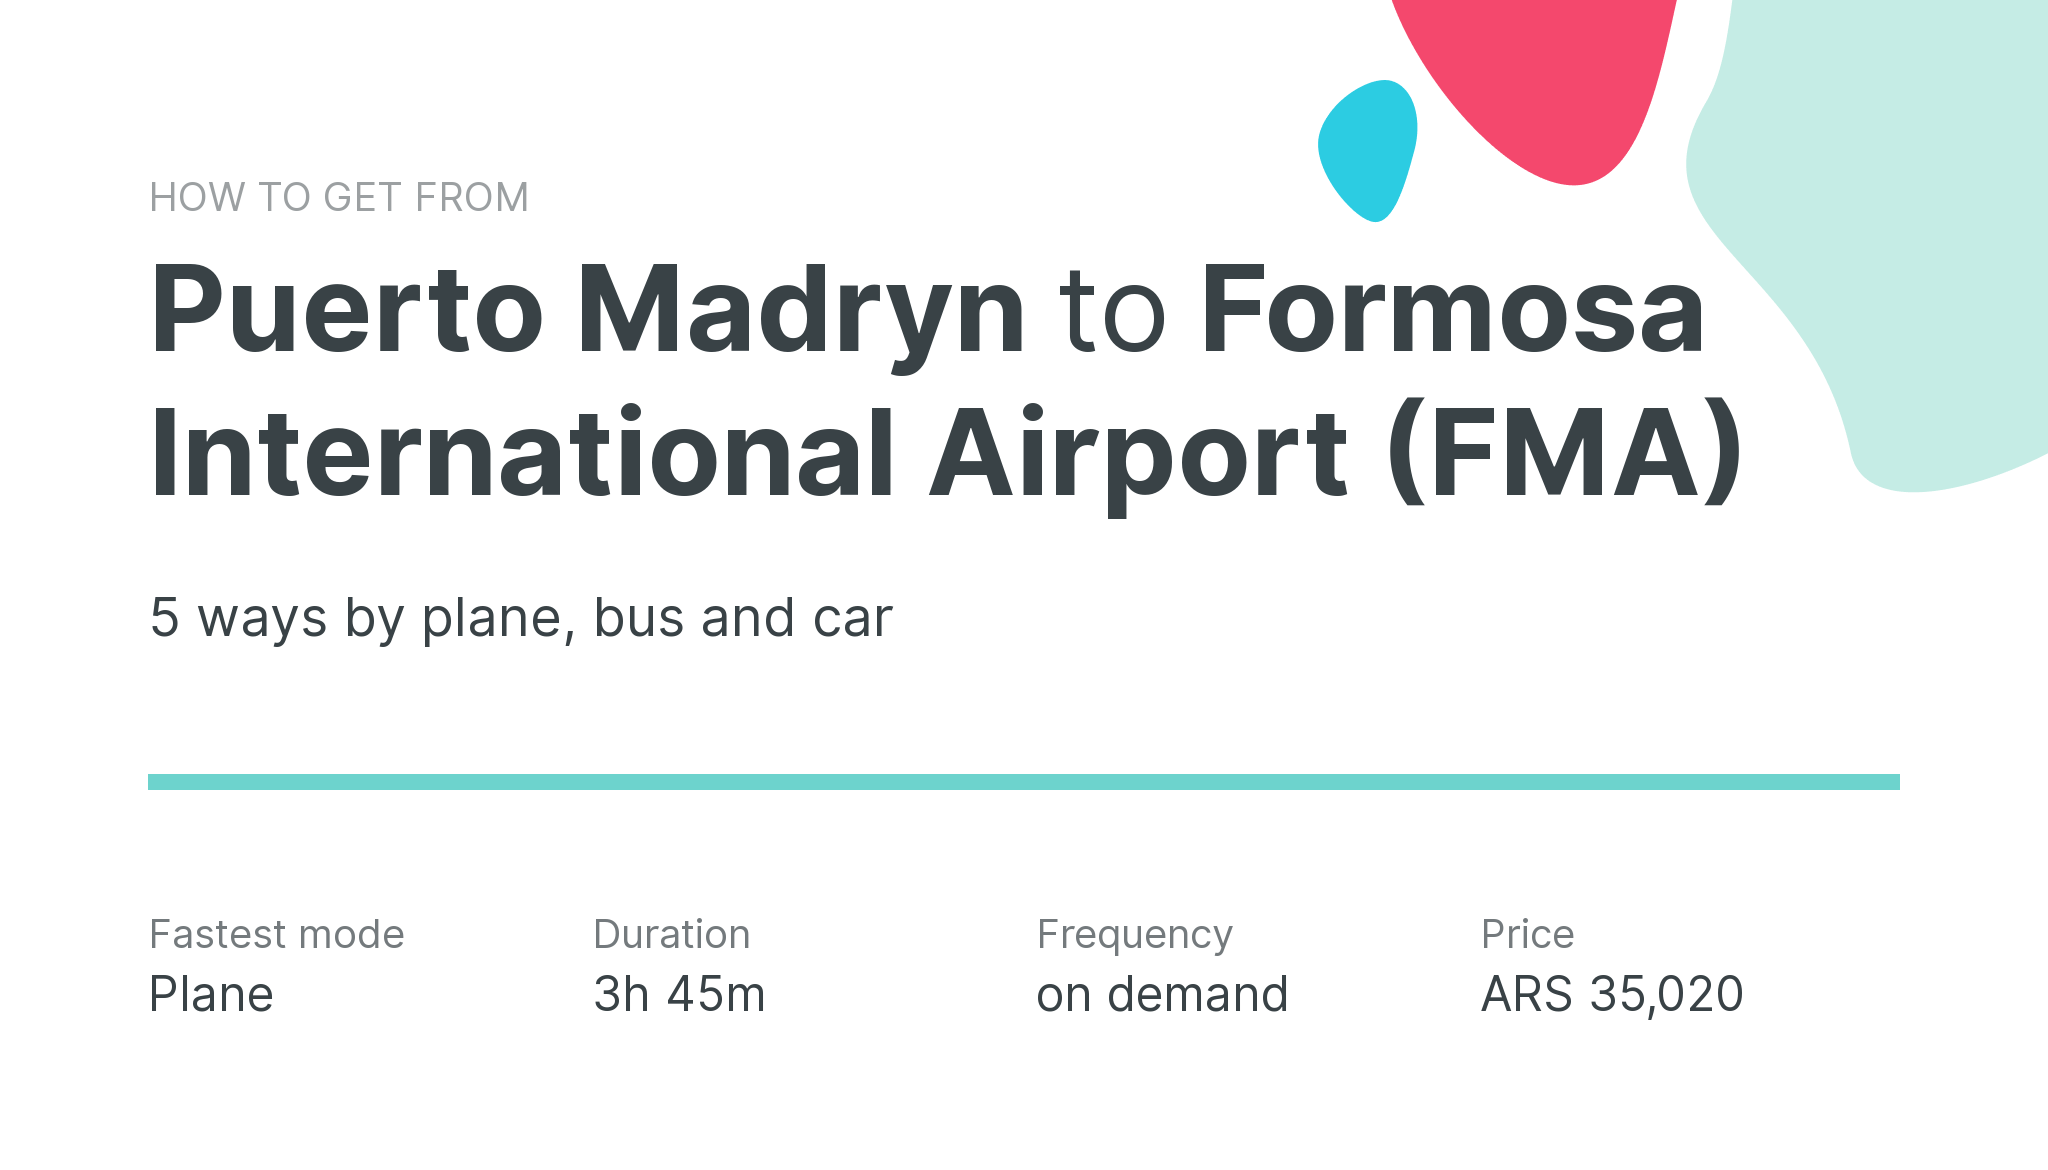 How do I get from Puerto Madryn to Formosa International Airport (FMA)